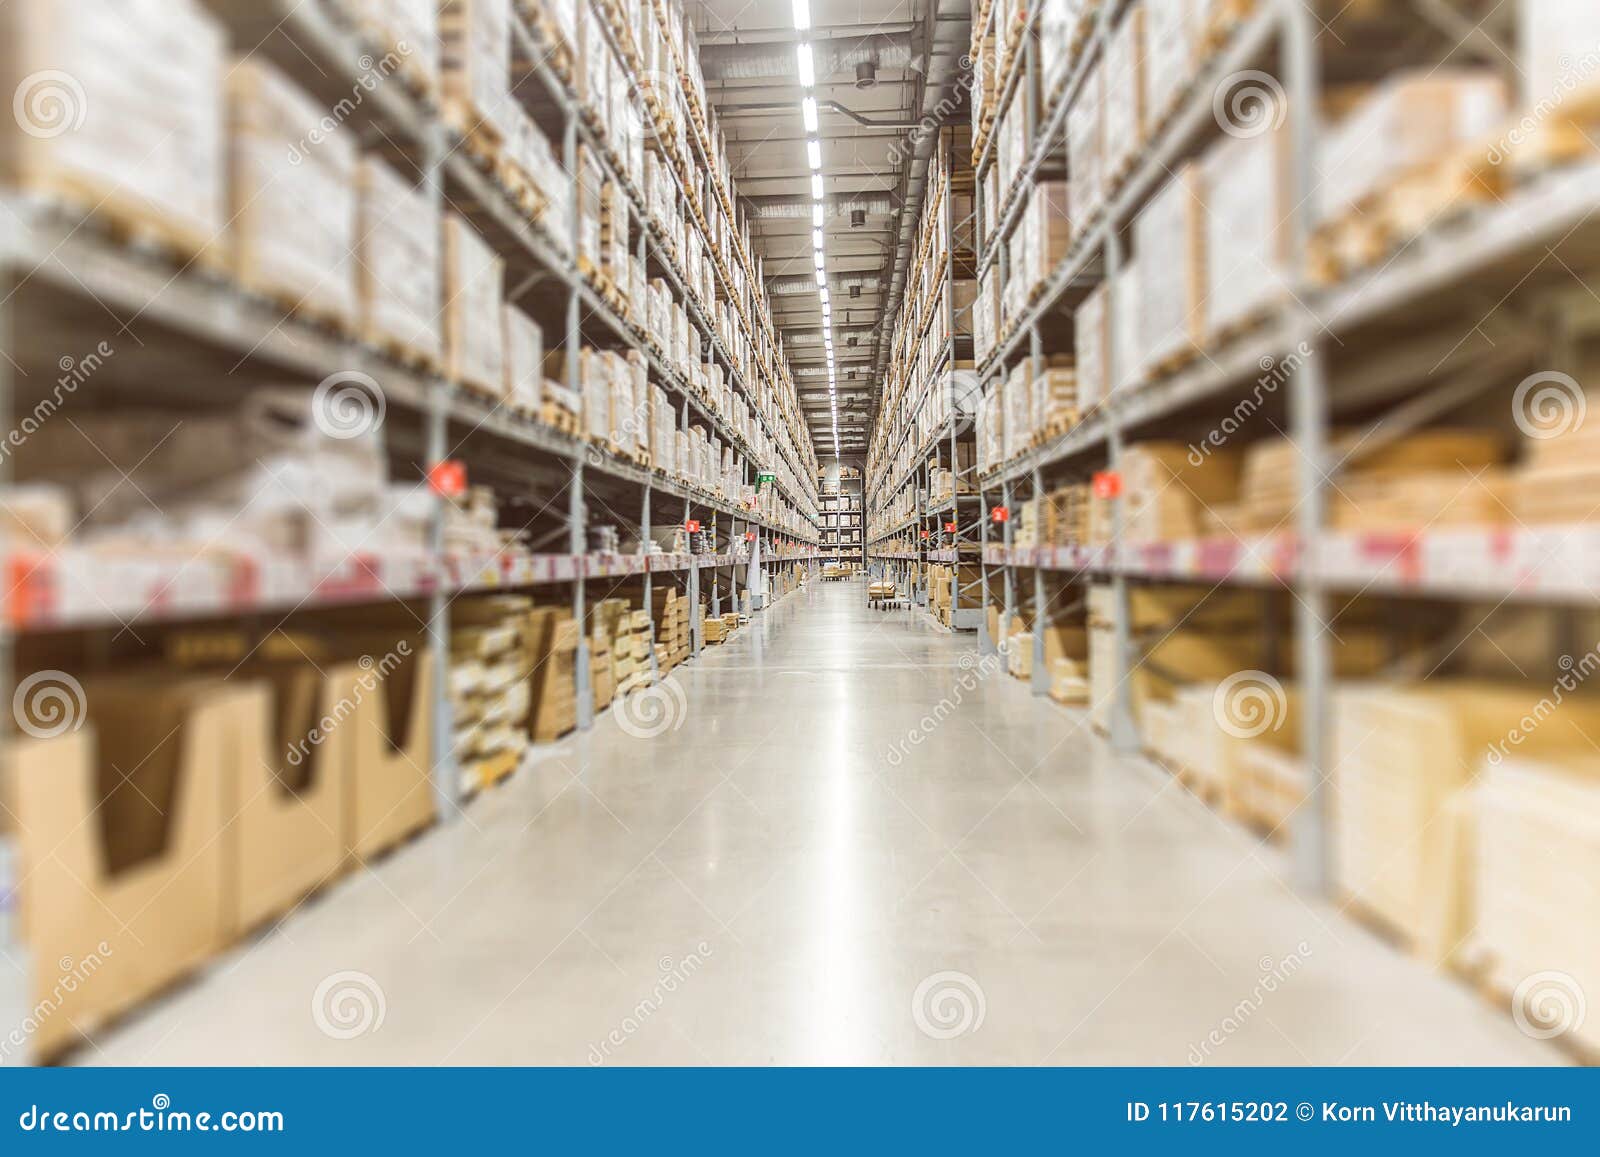 large inventory. warehouse goods stock for logistic shipping